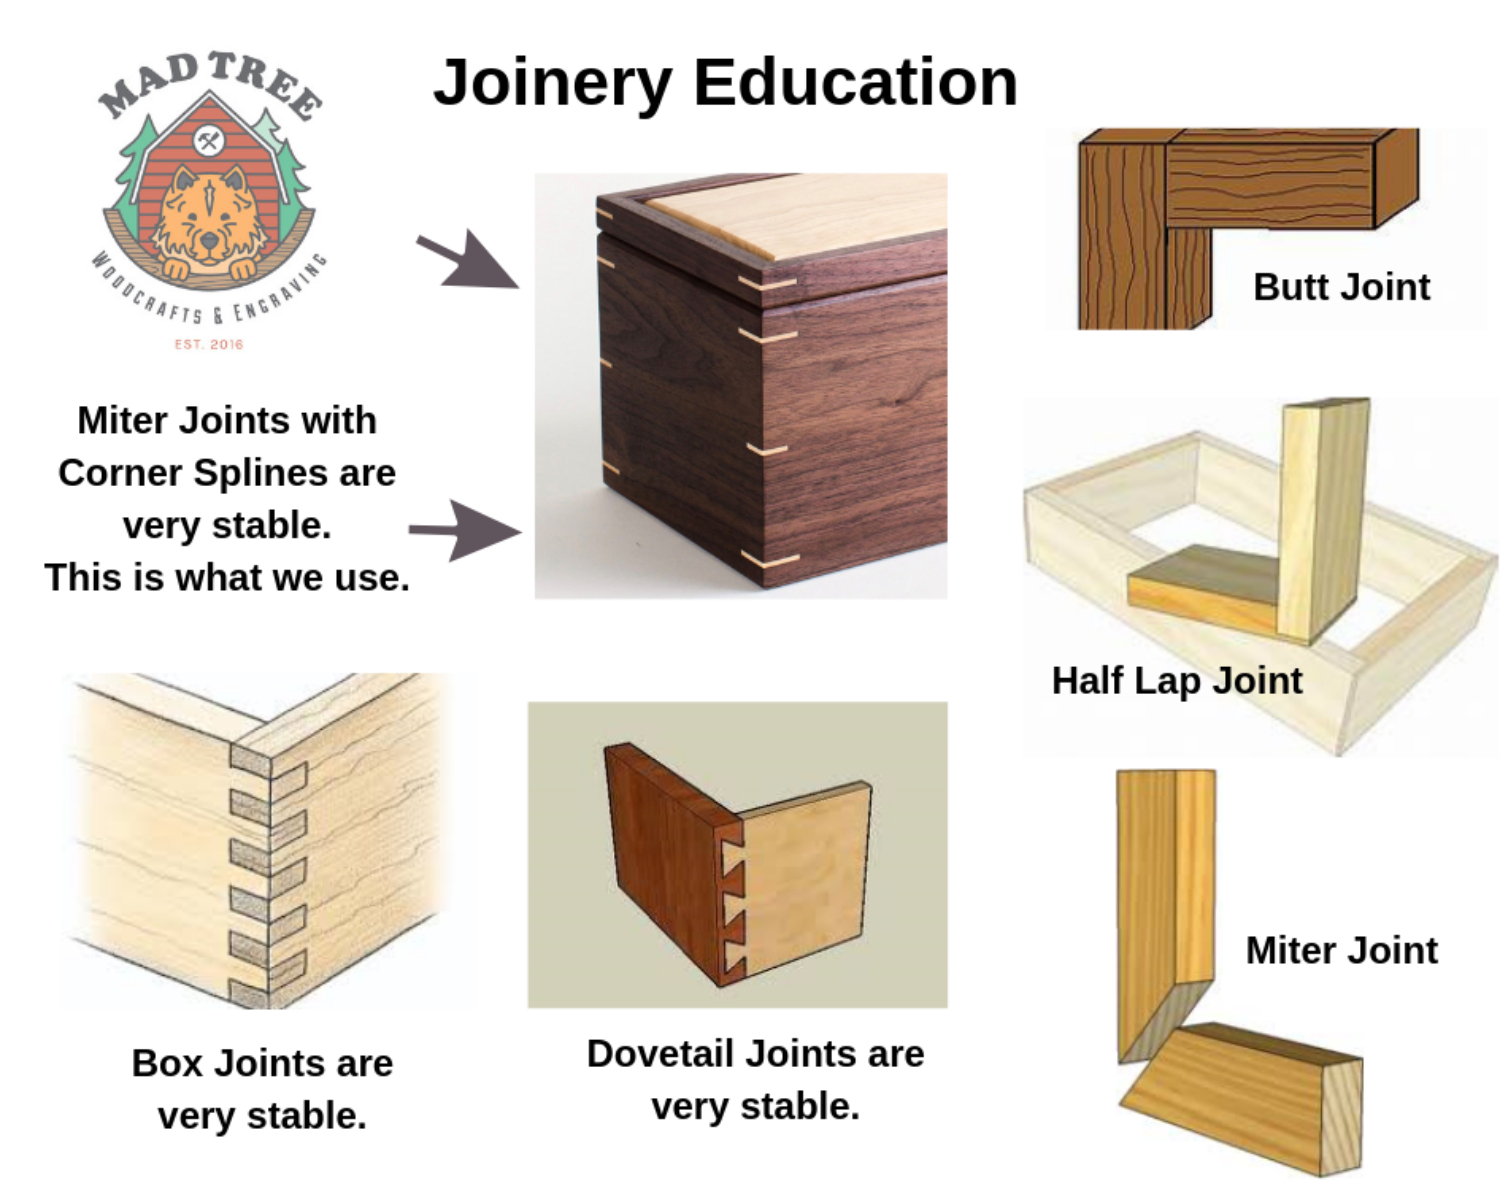 We Prefer Miter Joints with Corner Splines Joinery for the Durability